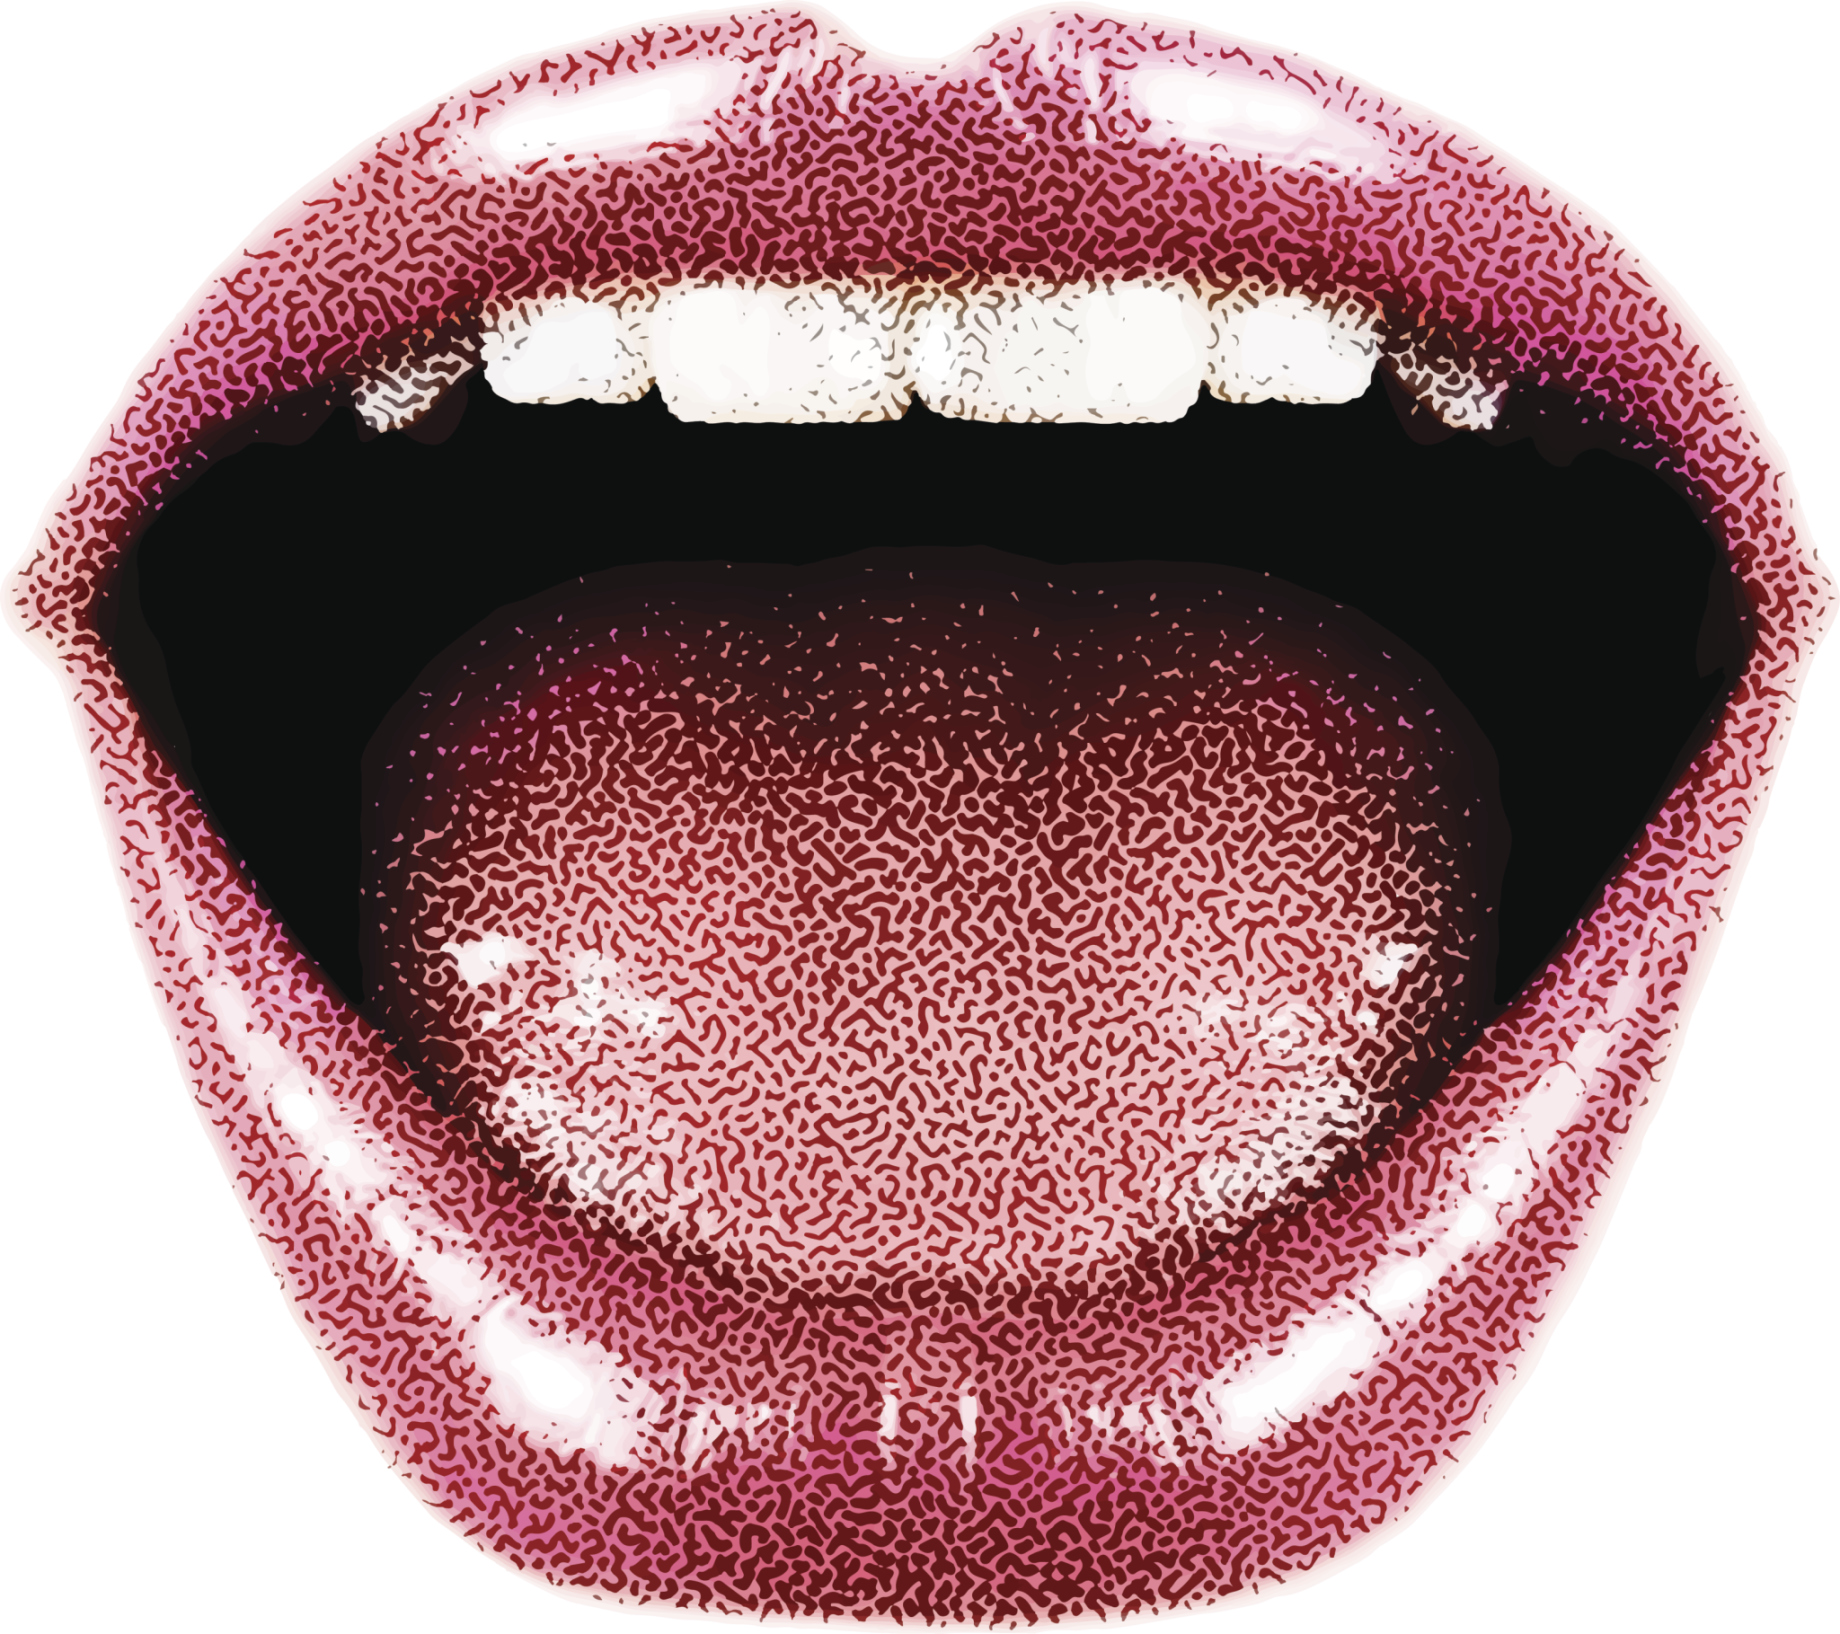 Woman's Laughing Mouth and Lips